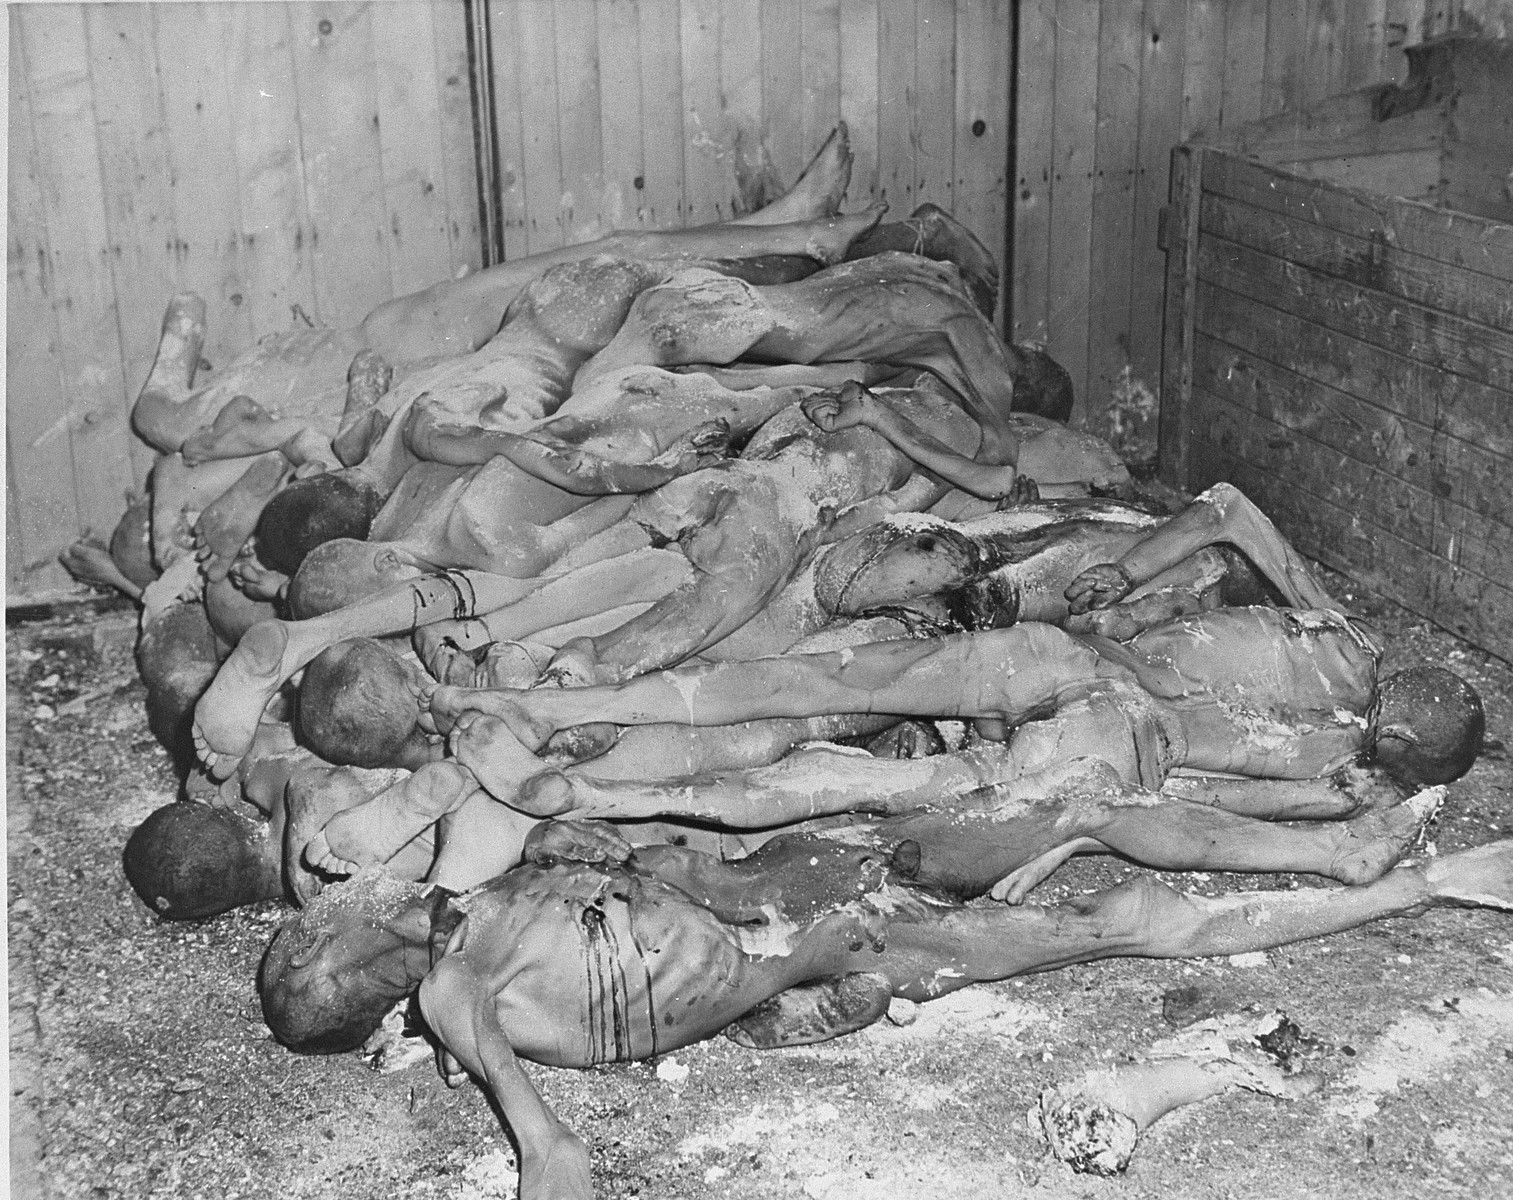 The bodies of prisoners lie stacked in a shed in the Ohrdruf concentration camp.  

The original caption reads "These emaciated, nude corpses, stacked like cord-wood in a bin at the concentration camp at Goth, Germany, tell their own story of the sadism and brutality of the Nazi gaolers.  They are strewn with quicklime in a haphazard attempt to destroy evidence of the crimes.  General Dwight D. Eisenhower, Supreme Allied Commander, viewed the Gotha horrors during a tour of the Third Army Front."